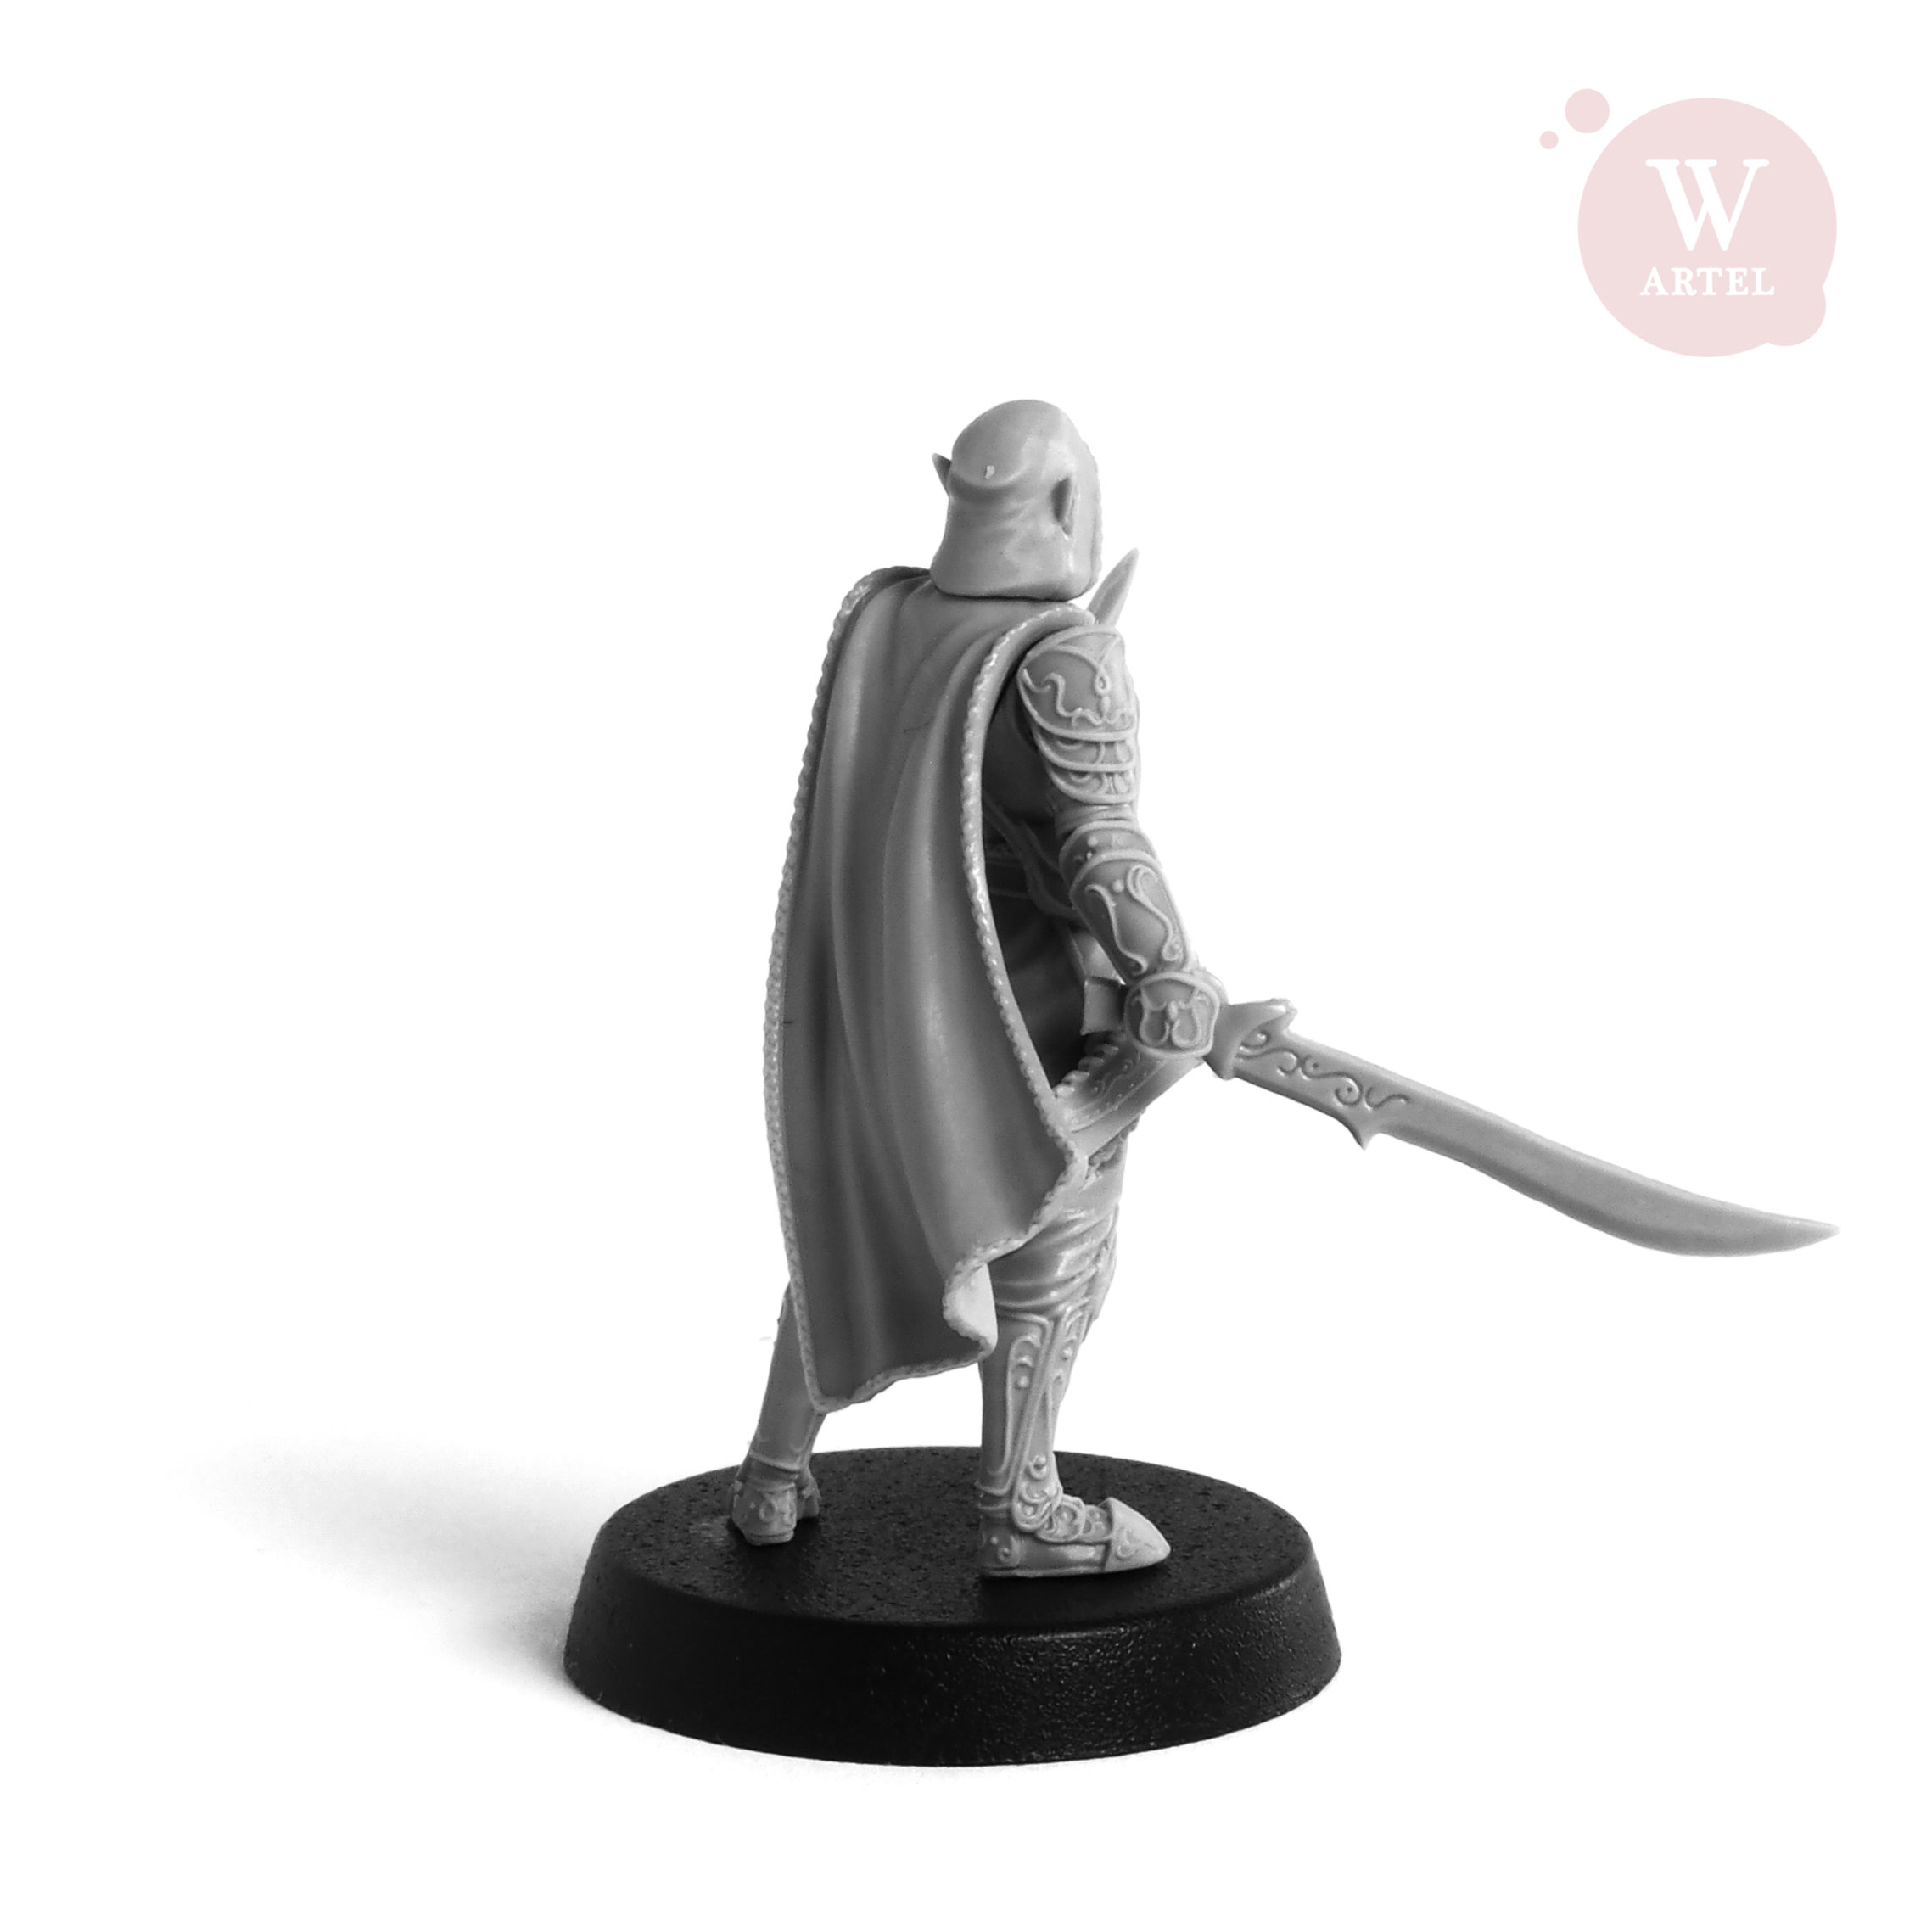 28mm wargaming and collectible miniature Warrior Elf by Artel "W" 